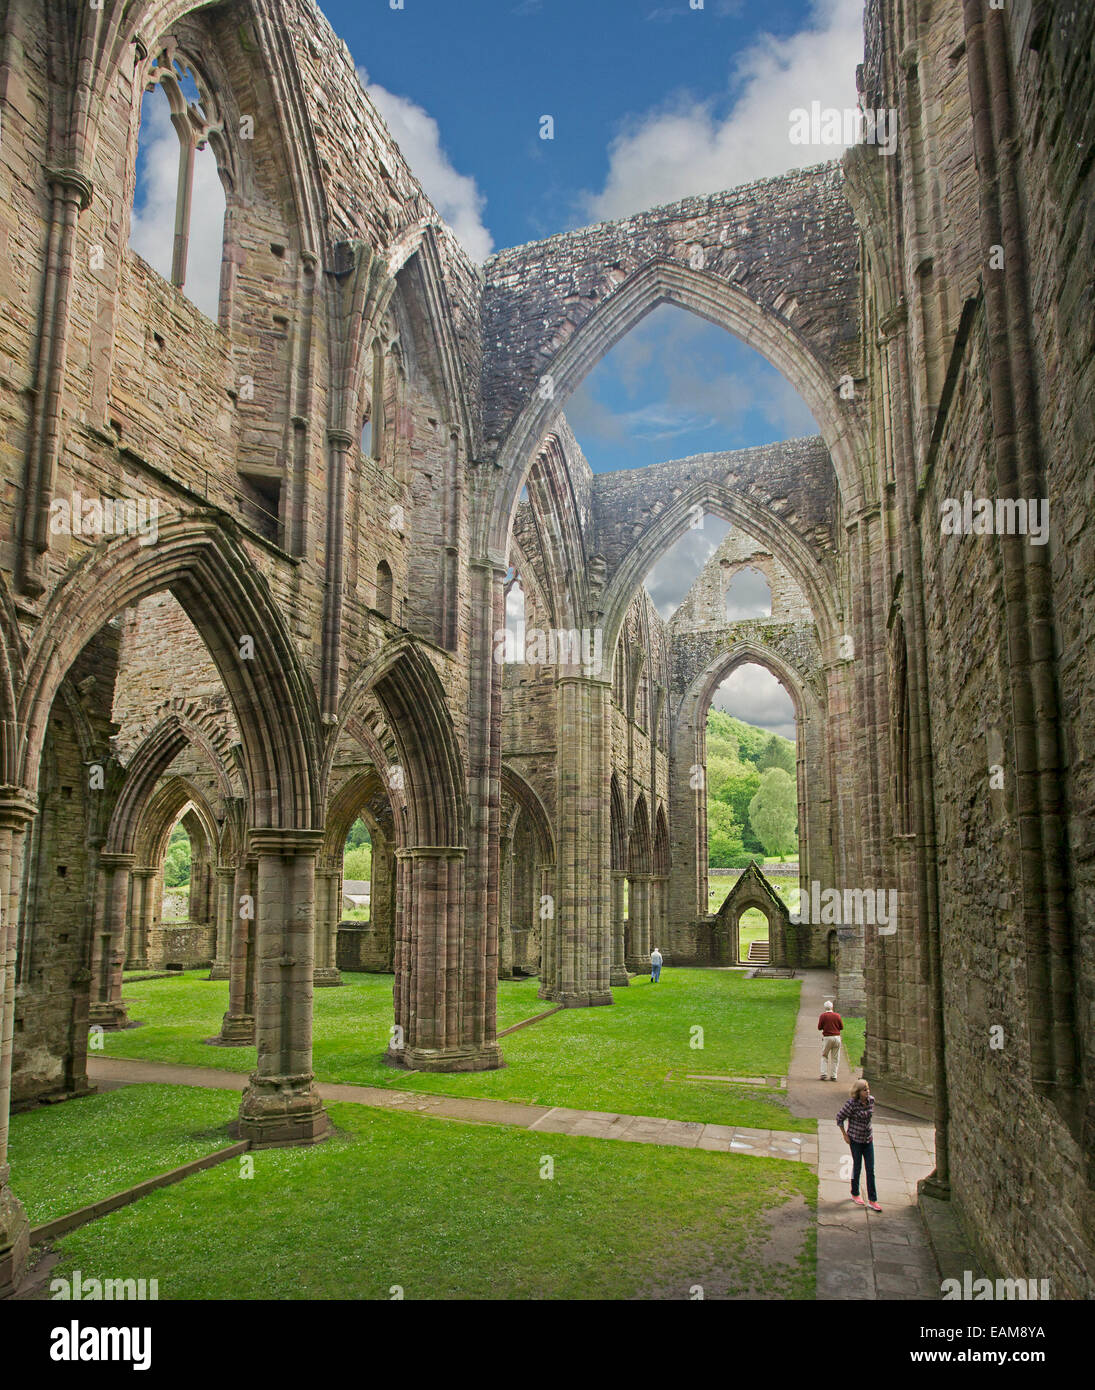 Spectacular remains of 12th century Tintern abbey with 2 people dwarfed by its immense walls and arches that rise into blue sky Stock Photo